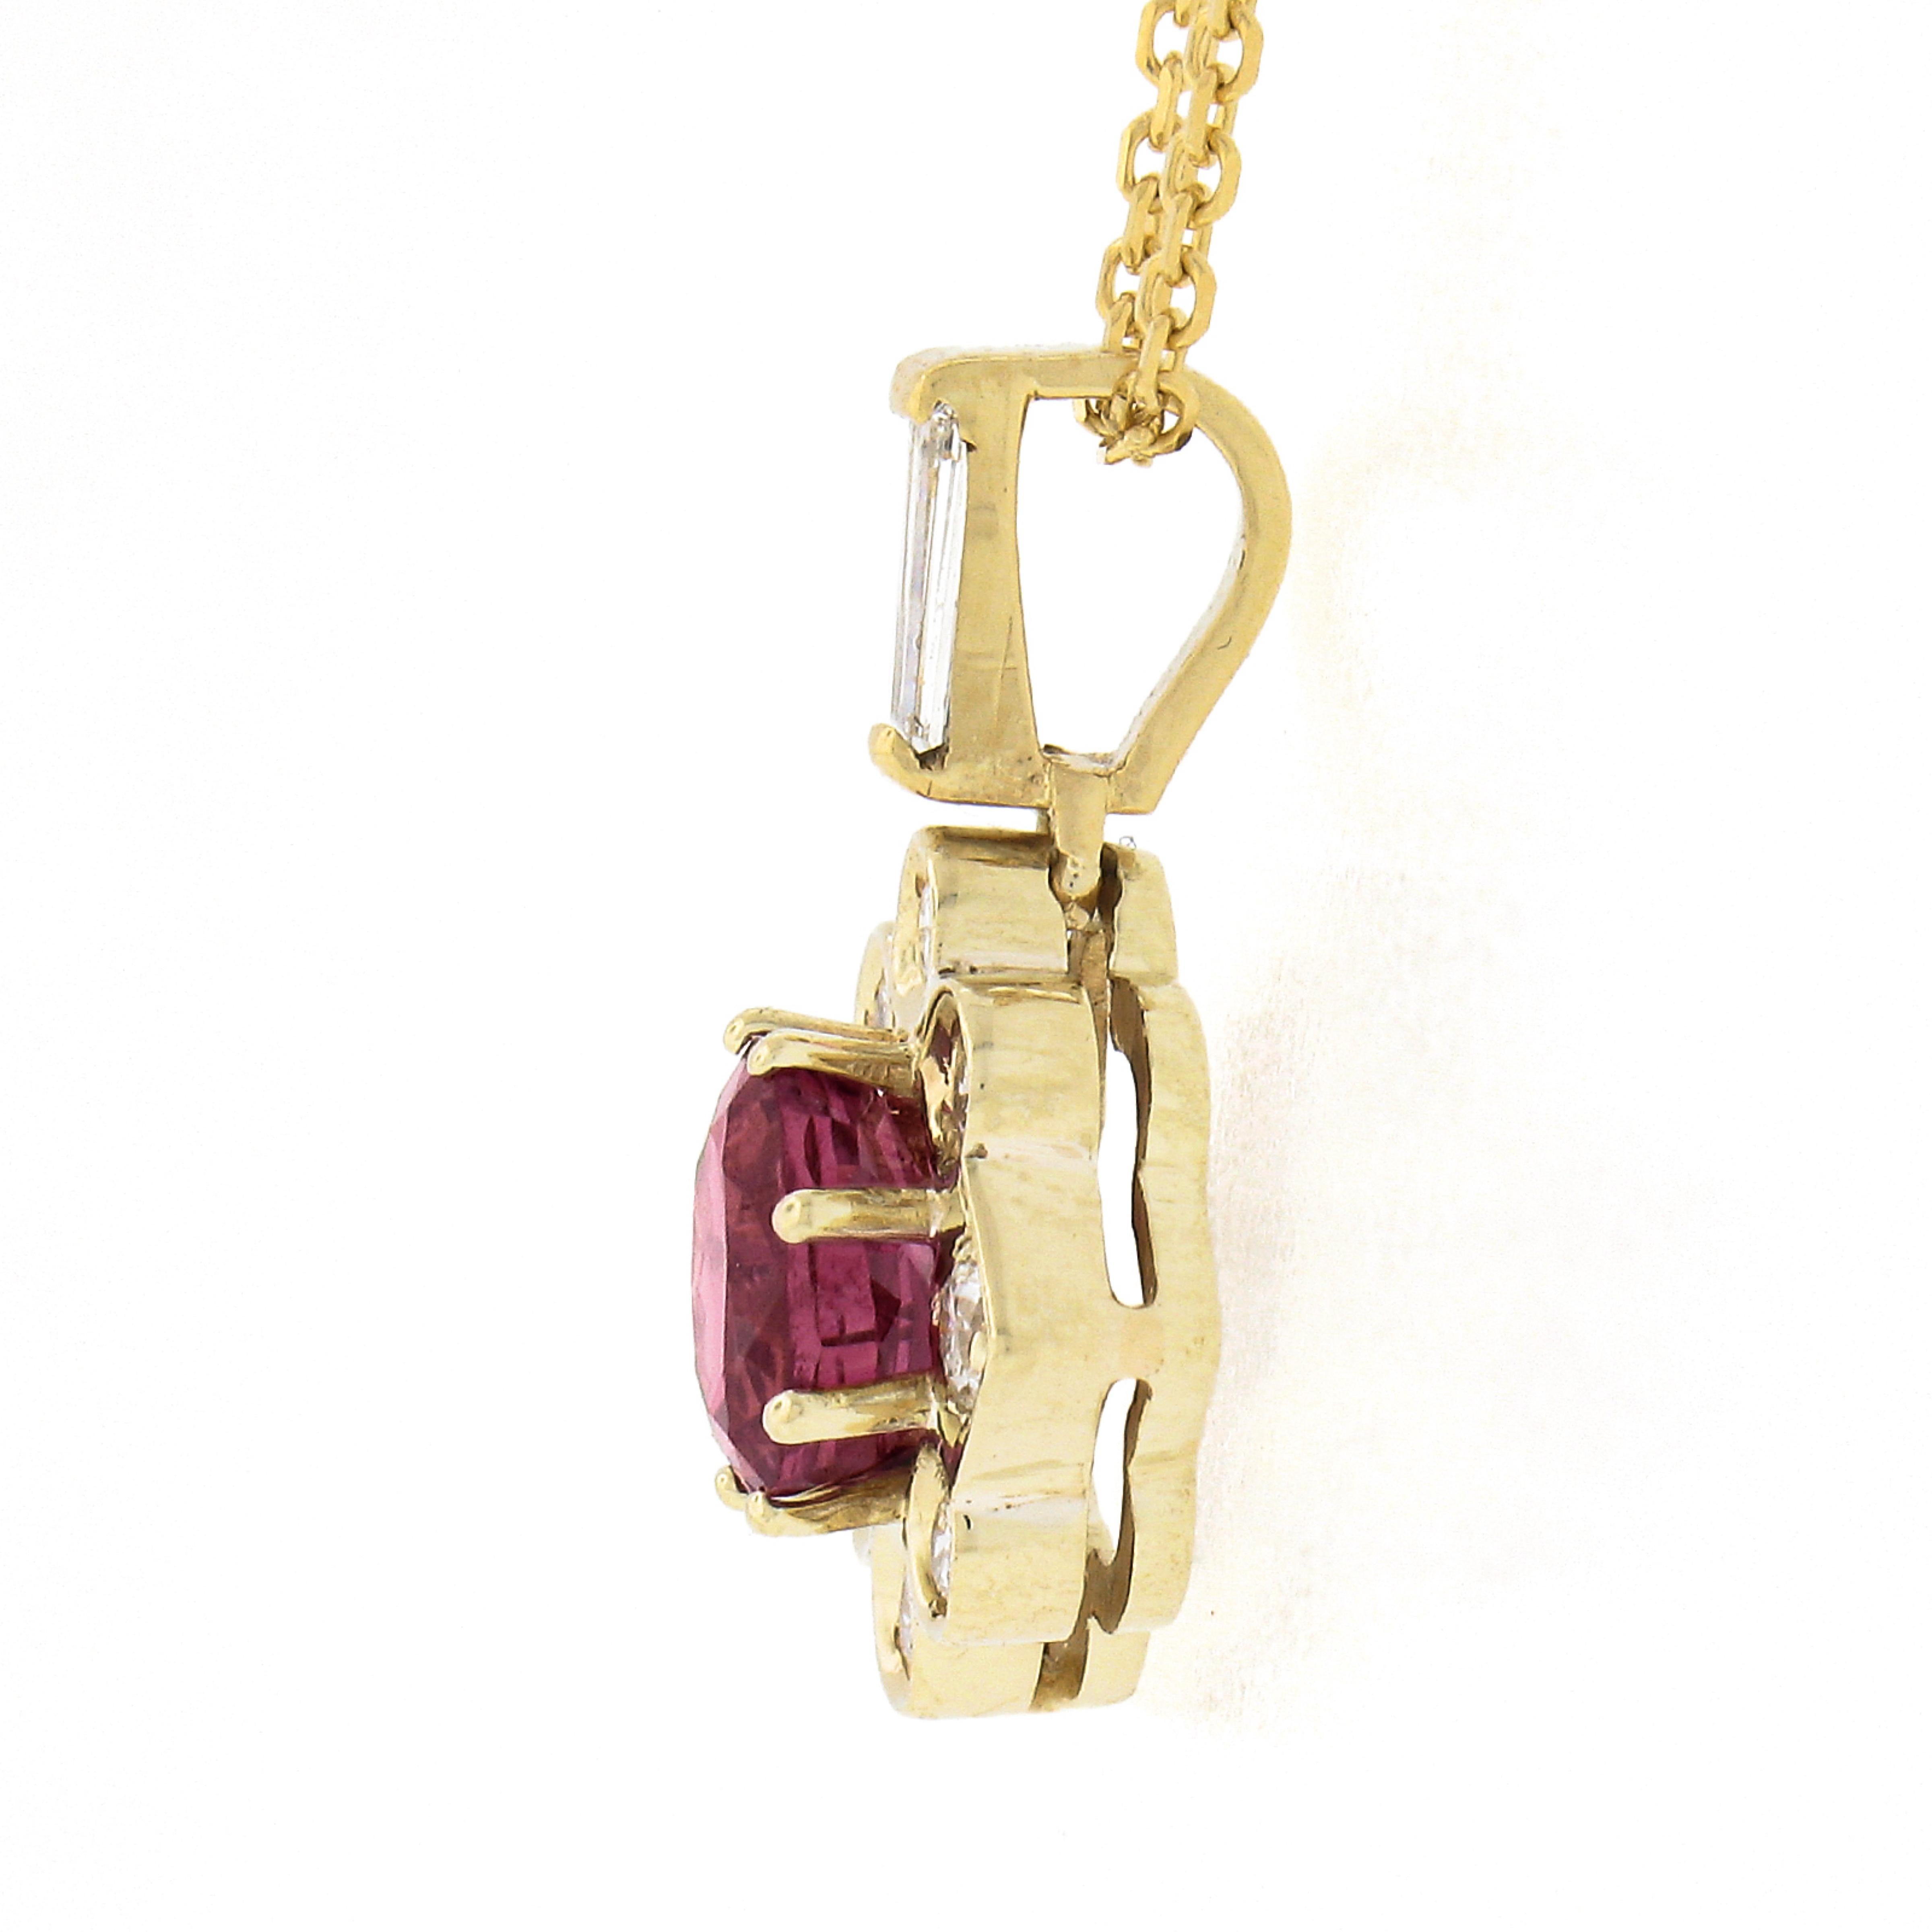 18k Gold Oval Spinel/Ruby & Diamond Halo Petite Floral Pendant Adjustable Chain In Excellent Condition For Sale In Montclair, NJ